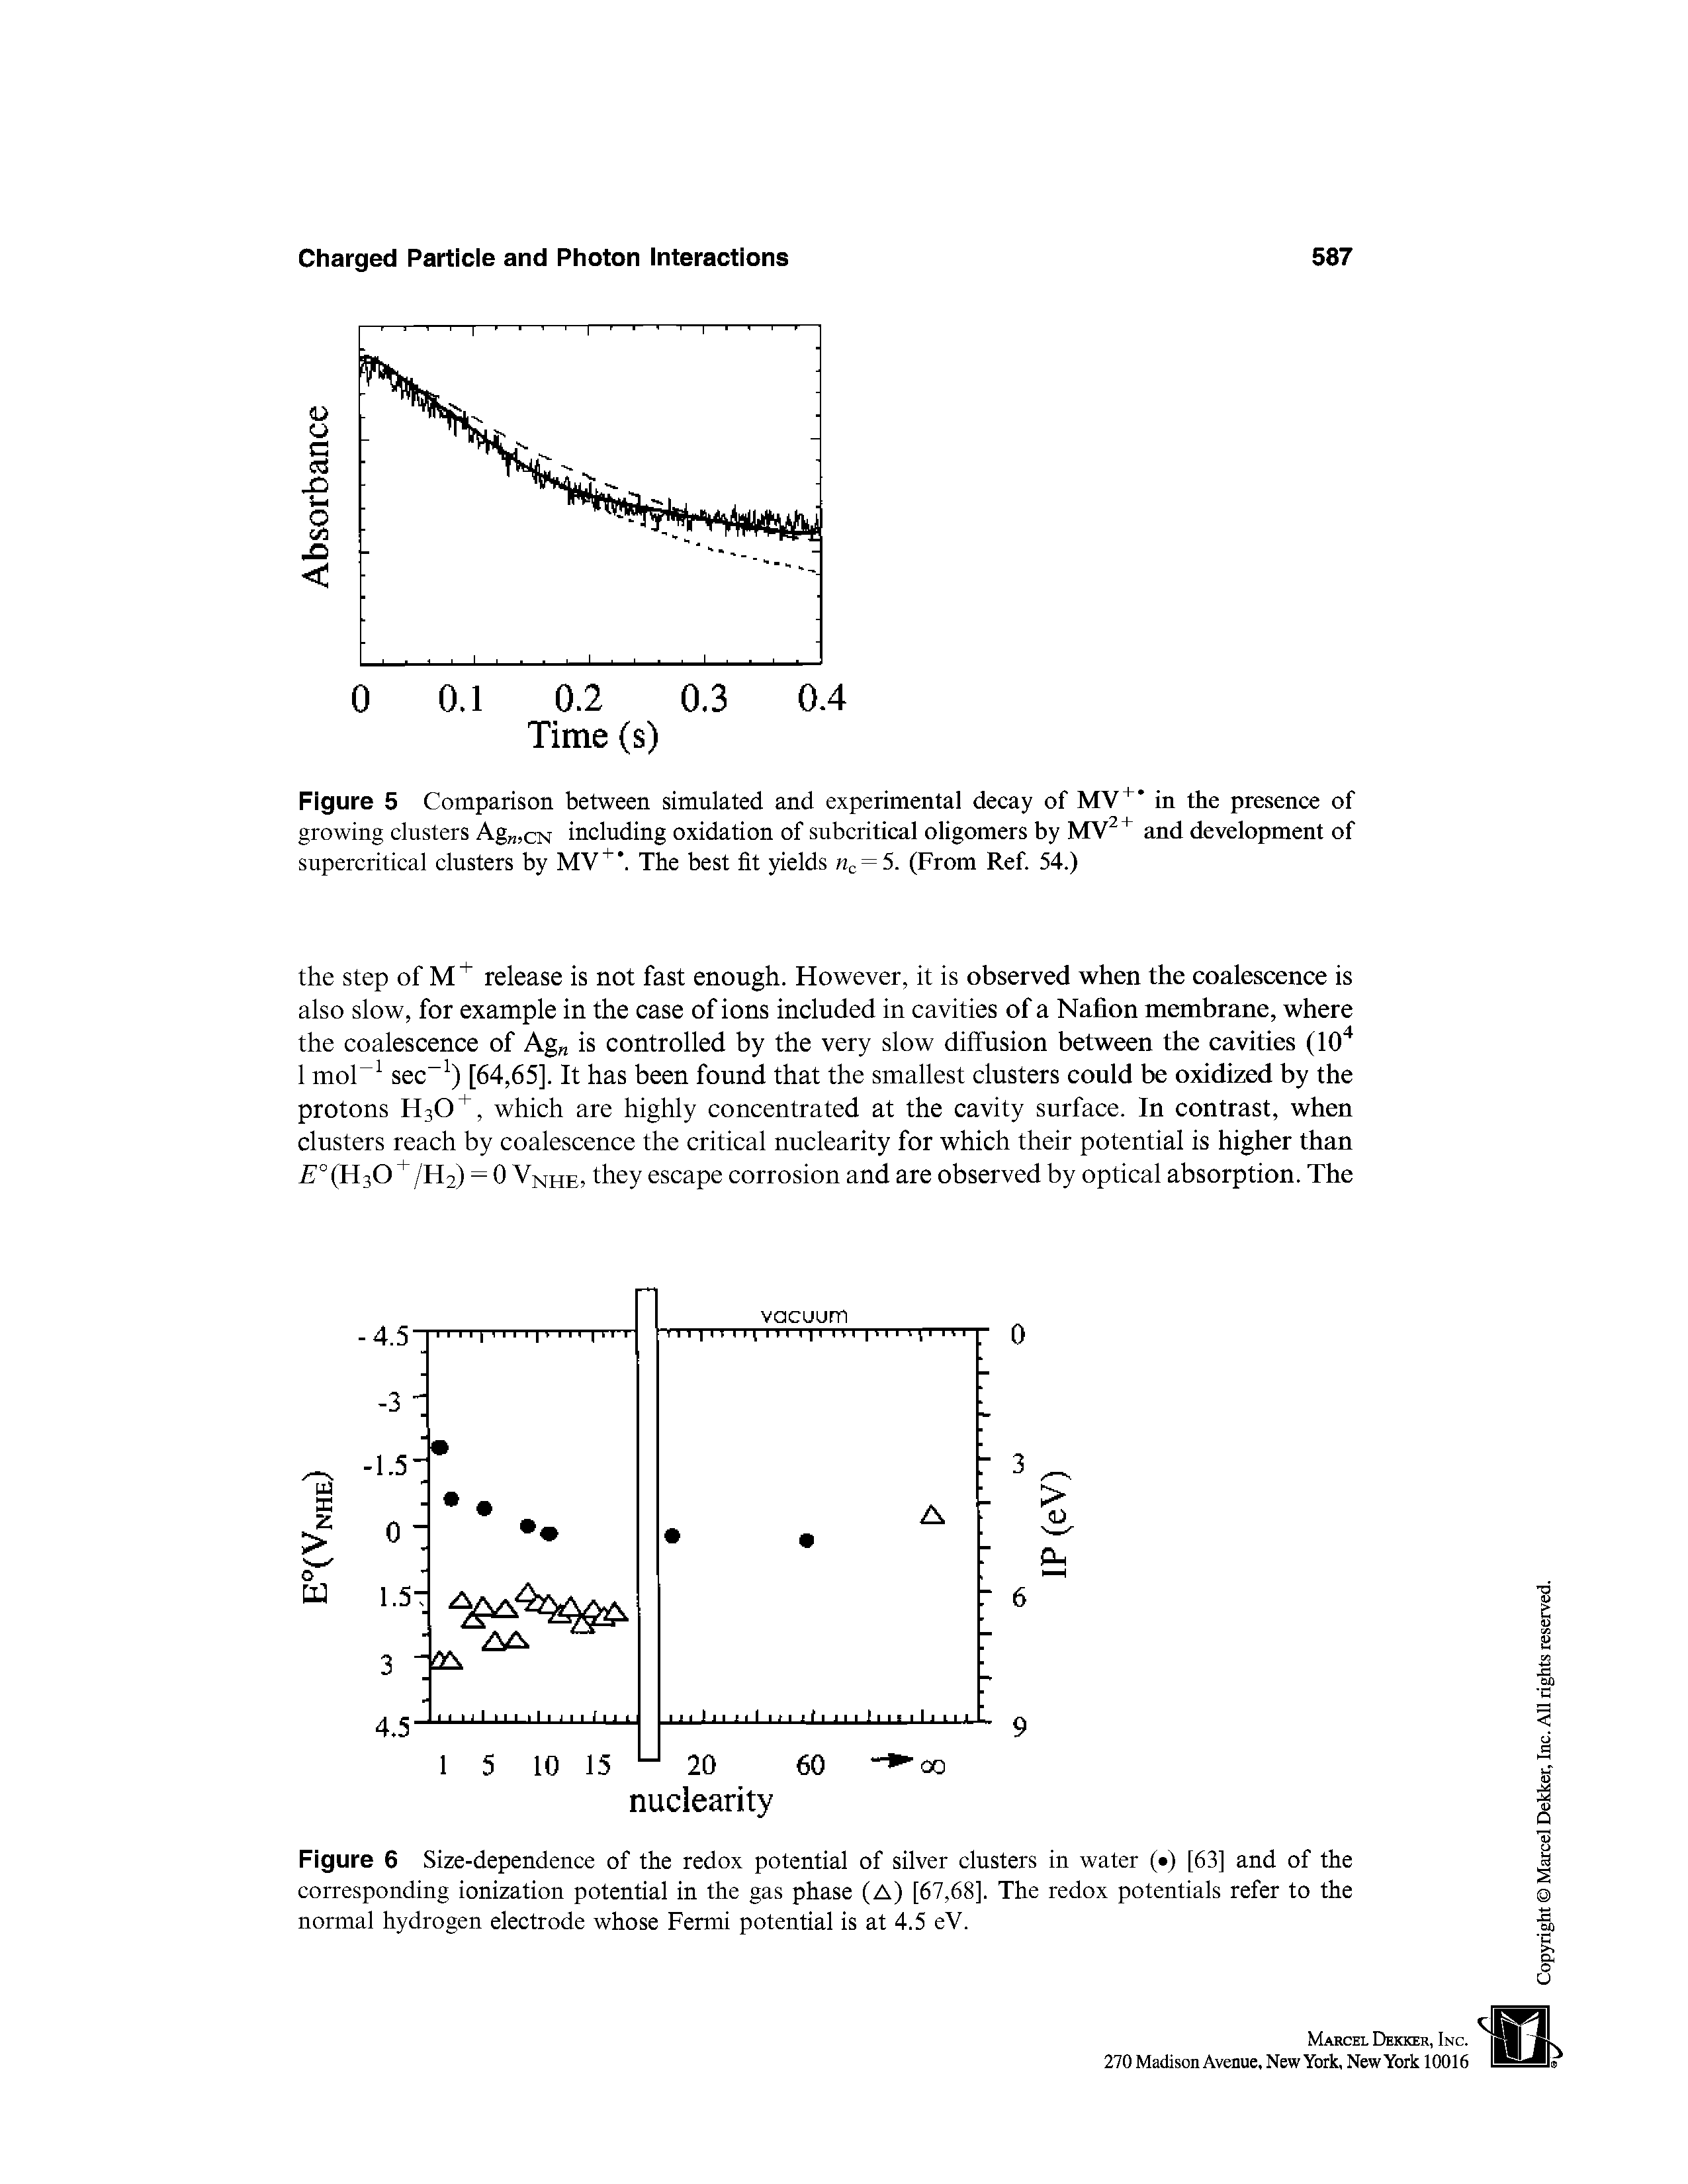 Figure 6 Size-dependence of the redox potential of silver clusters in water ( ) [63] and of the corresponding ionization potential in the gas phase (A) [67,68]. The redox potentials refer to the normal hydrogen electrode whose Fermi potential is at 4.5 eV.